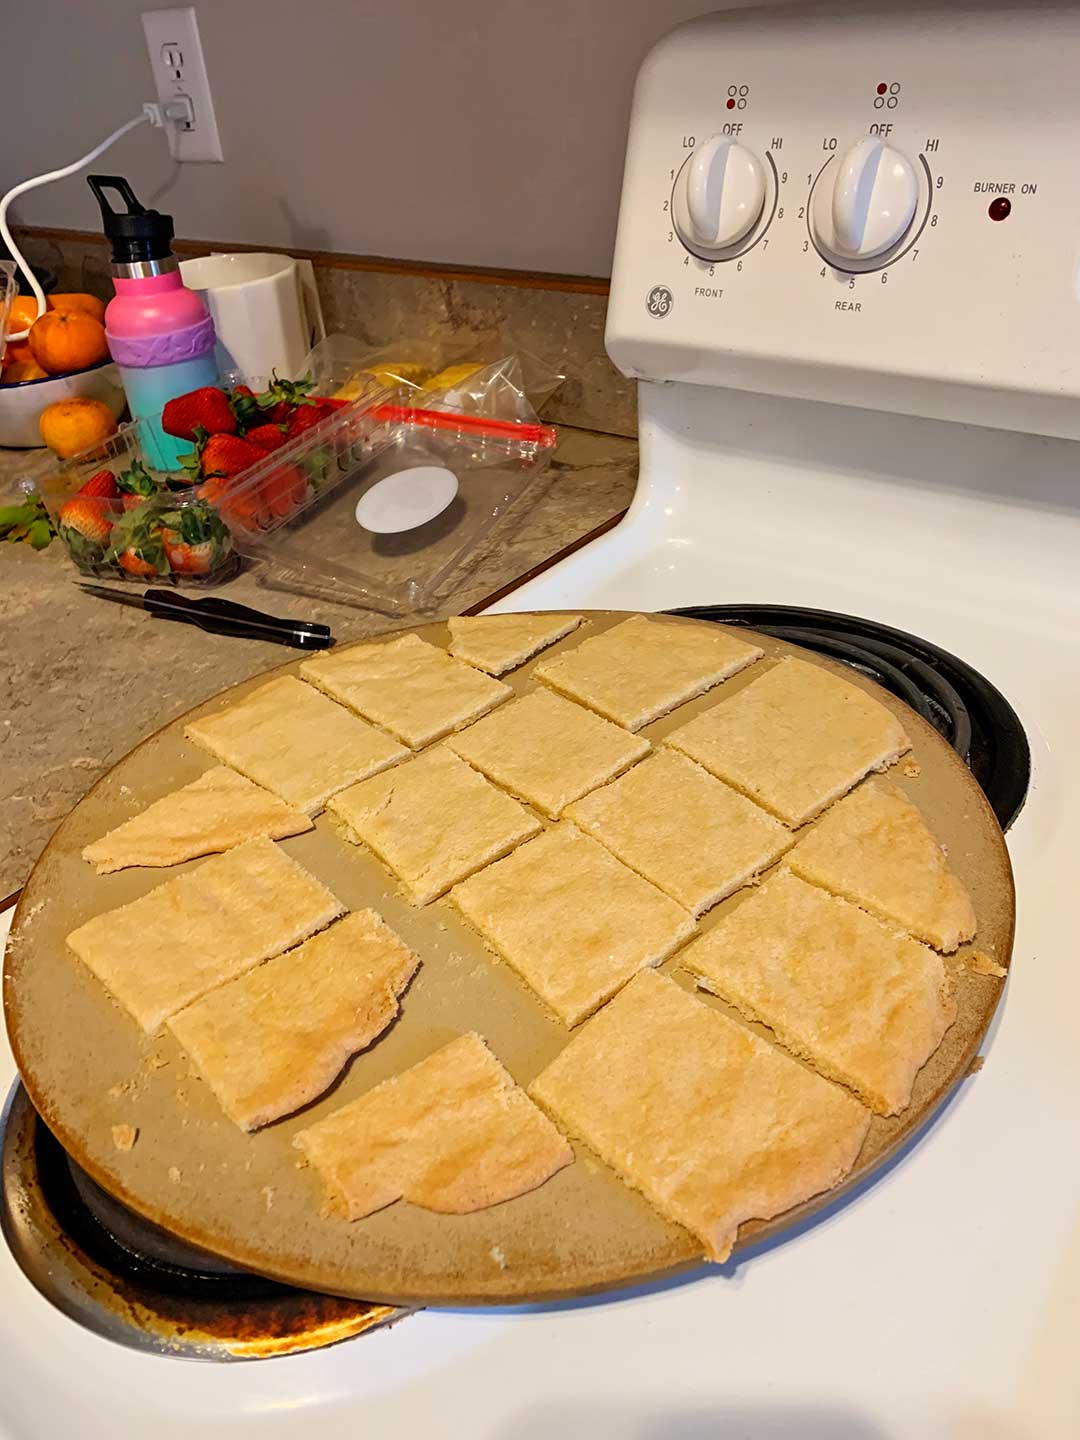 A sugar cookie crust on a pizza stone, sitting on the oven near some strawberries.